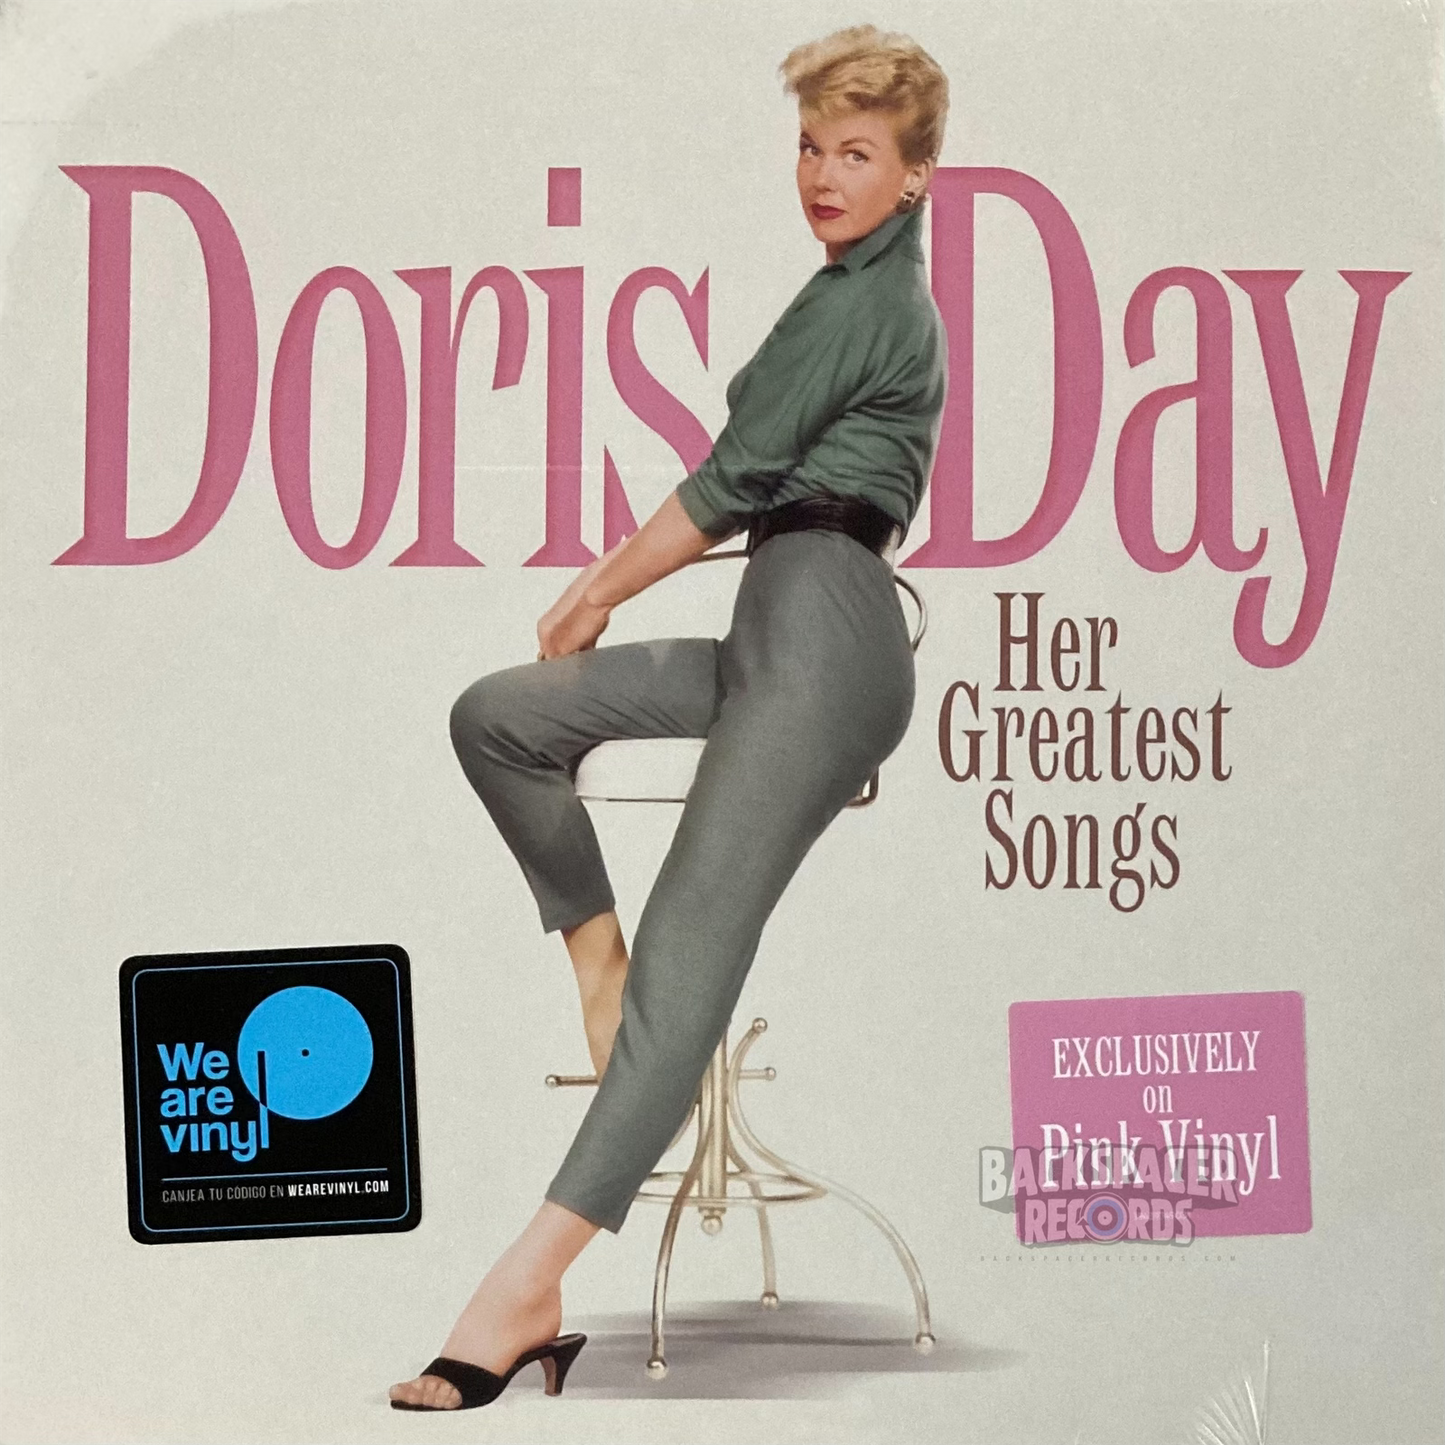 Doris Day - Her Greatest Songs (Limited Edition)